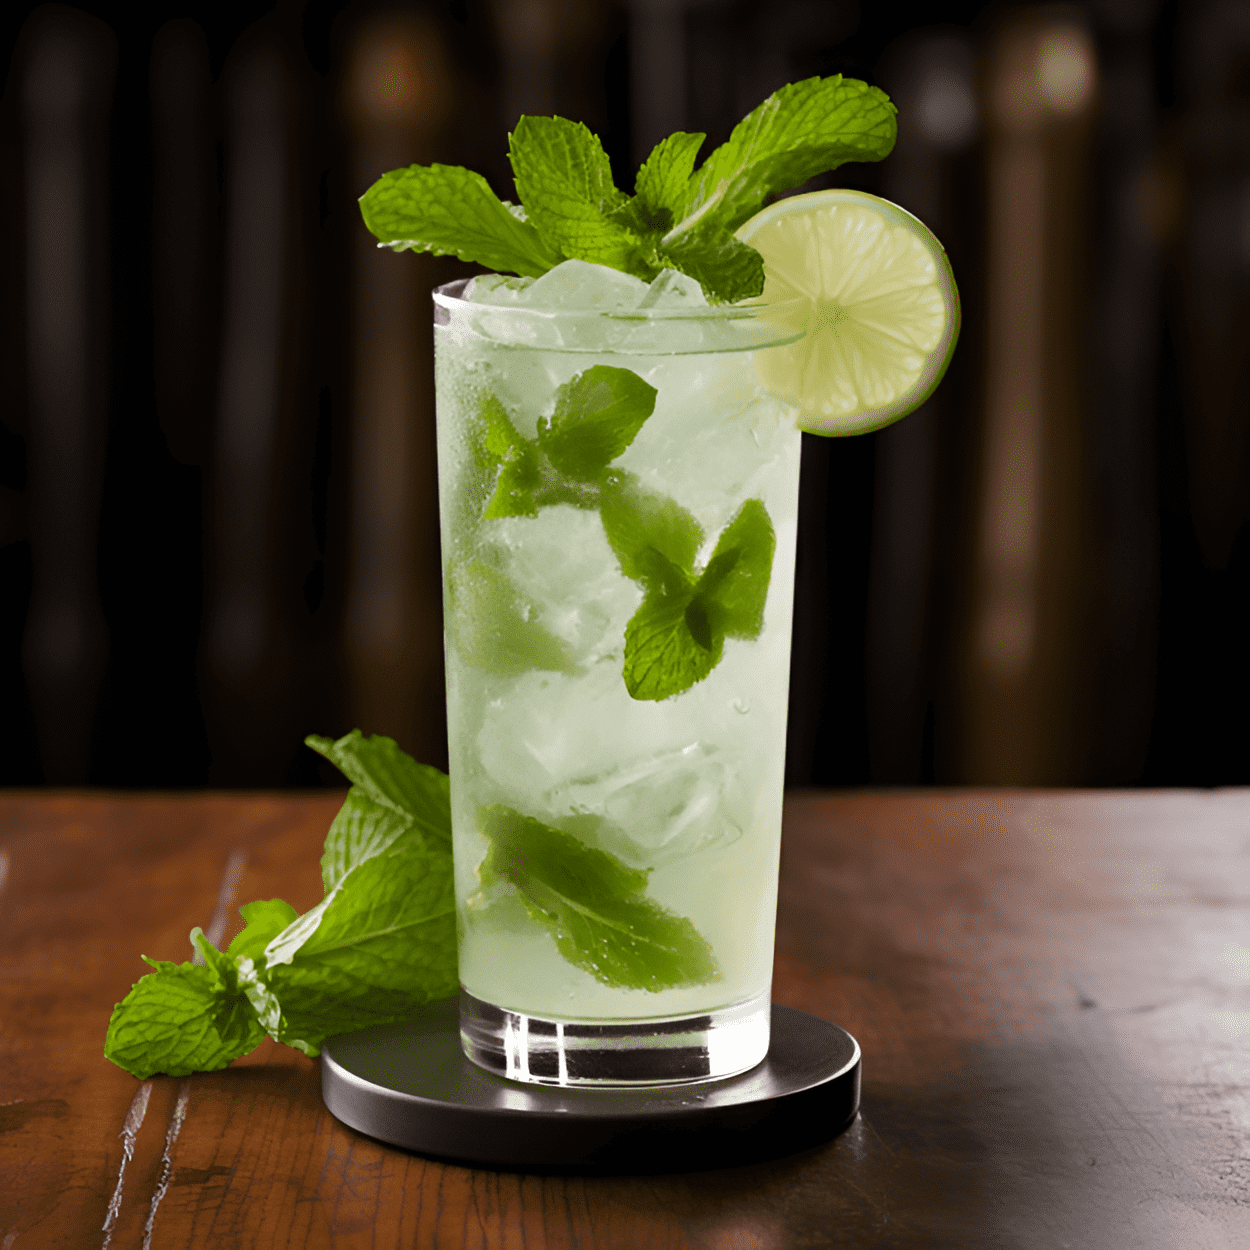 Elderflower Mojito Cocktail Recipe - The Elderflower Mojito is a delightfully refreshing cocktail. It's sweet, but not overly so, with the elderflower adding a light, floral note. The lime and mint provide a tangy freshness that balances the sweetness, while the rum gives it a kick.